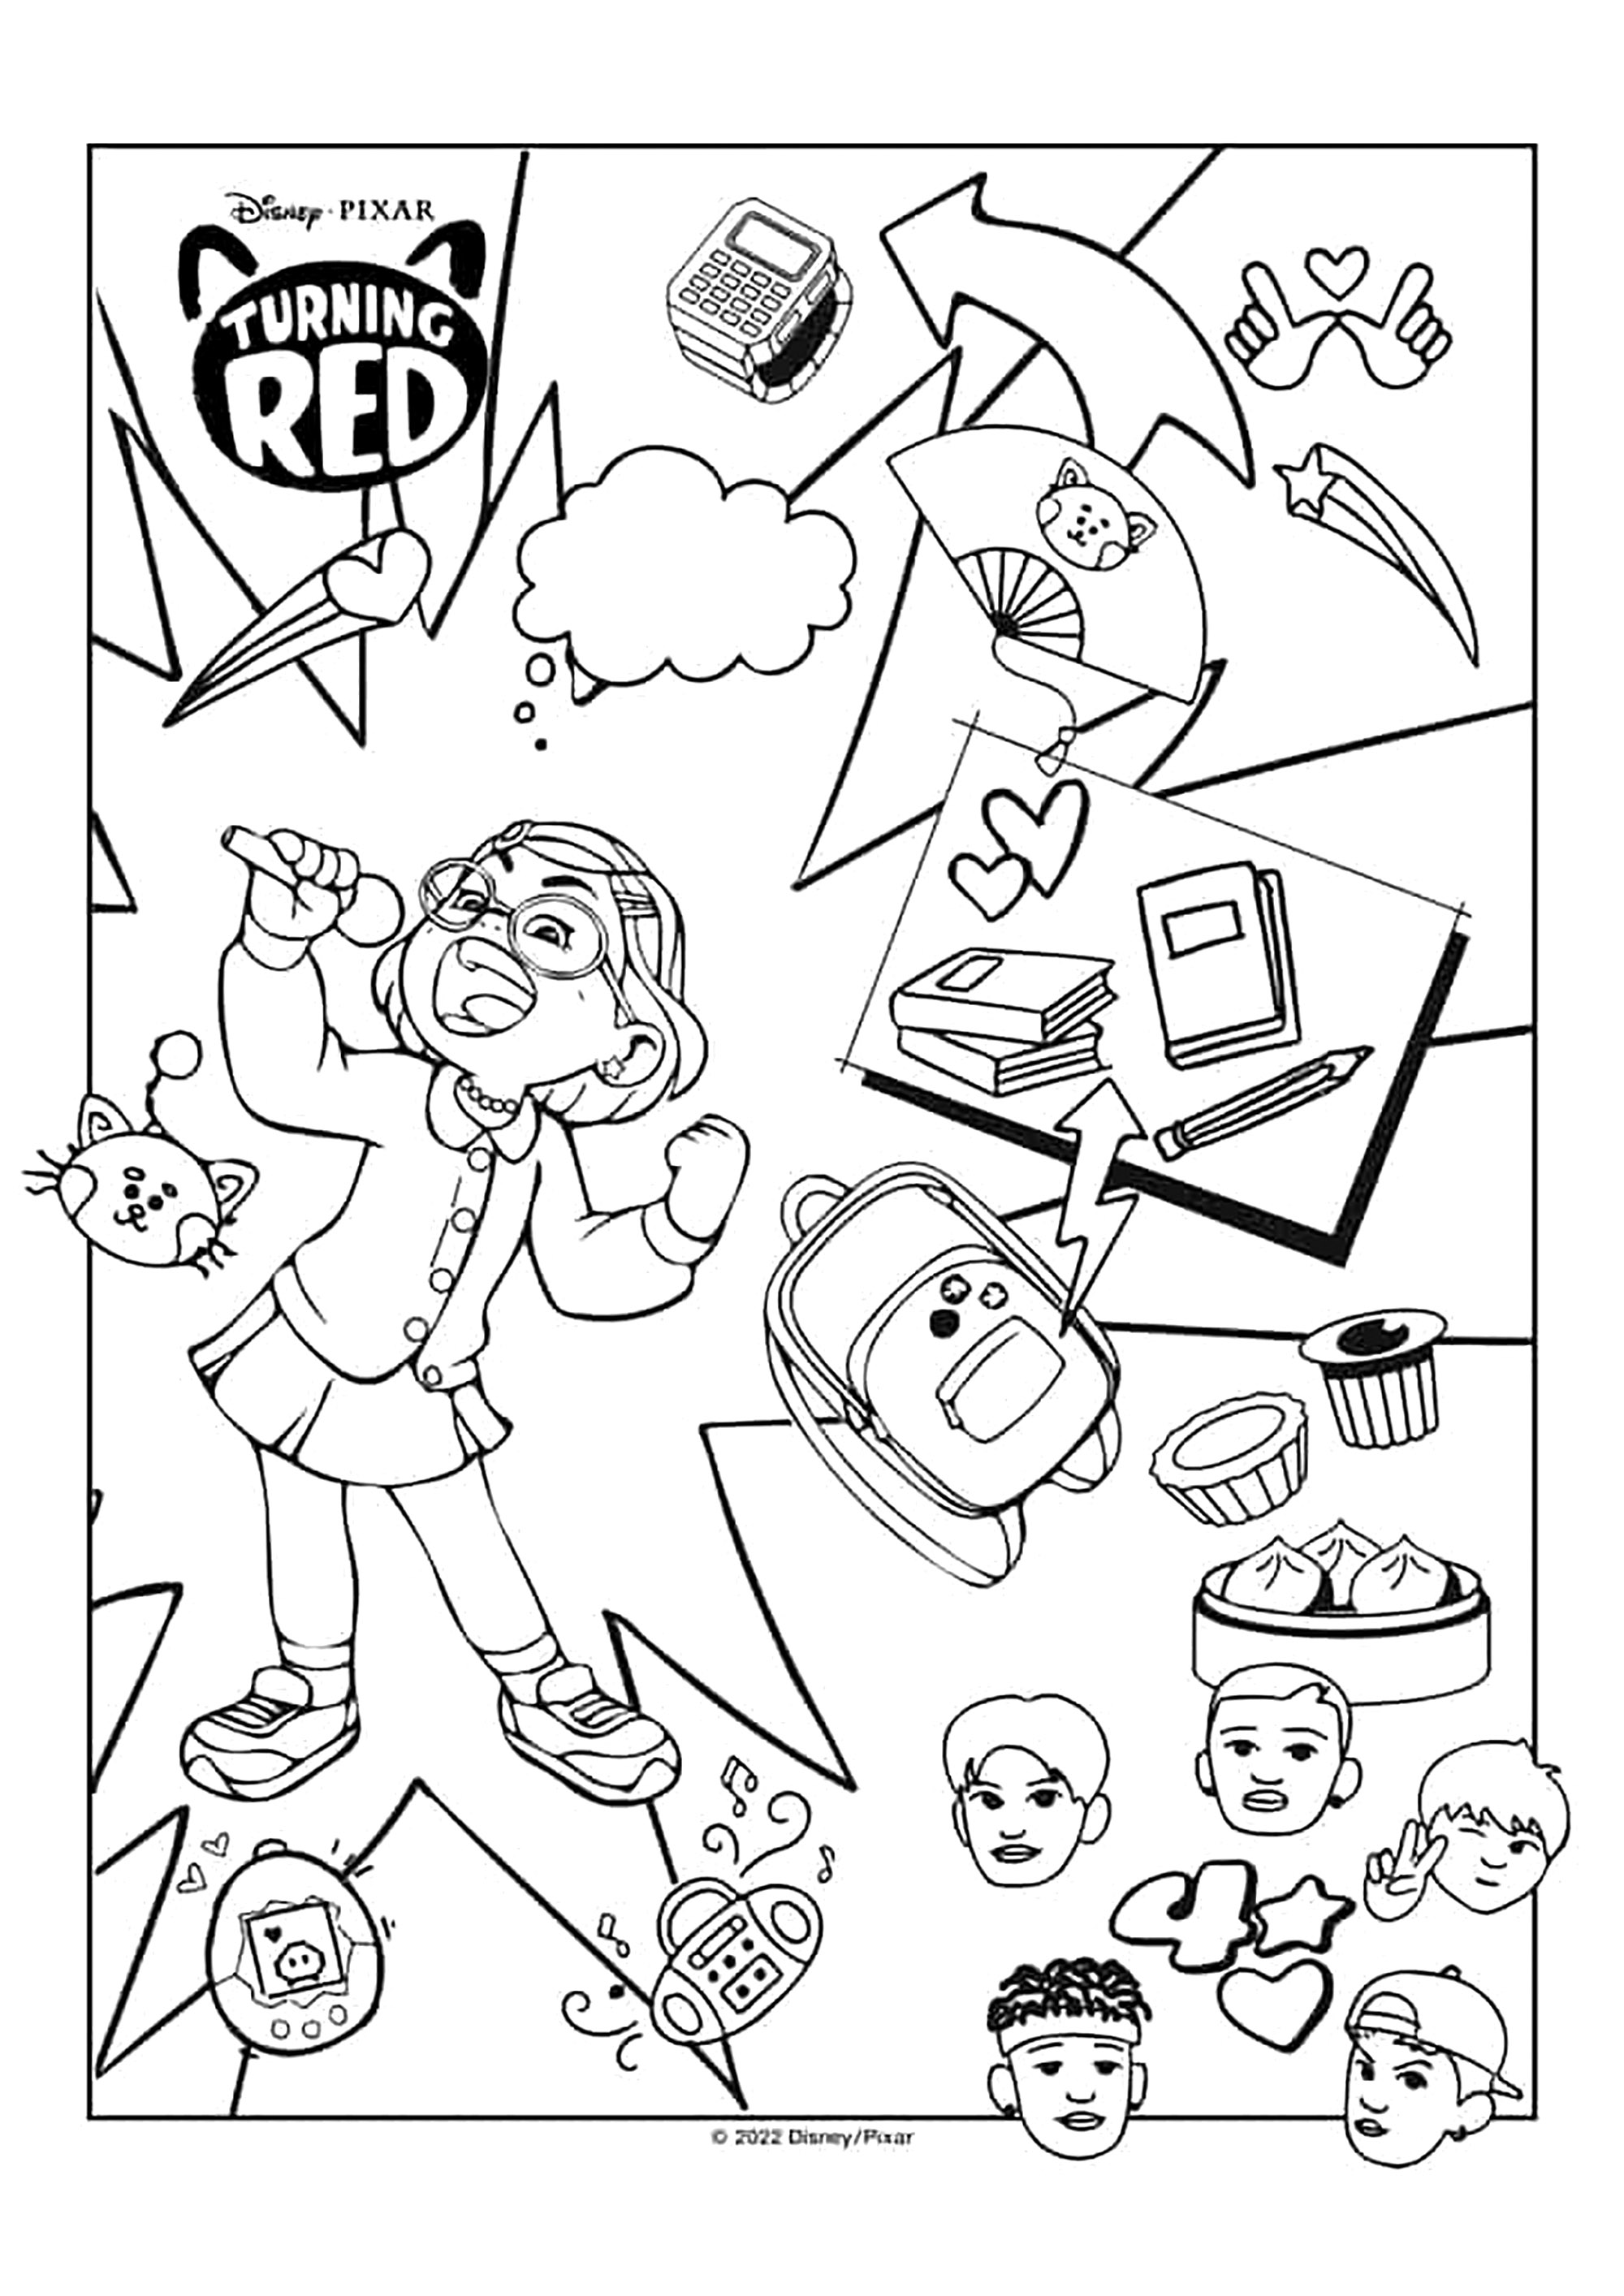 Turning red coloring page from disney pixar